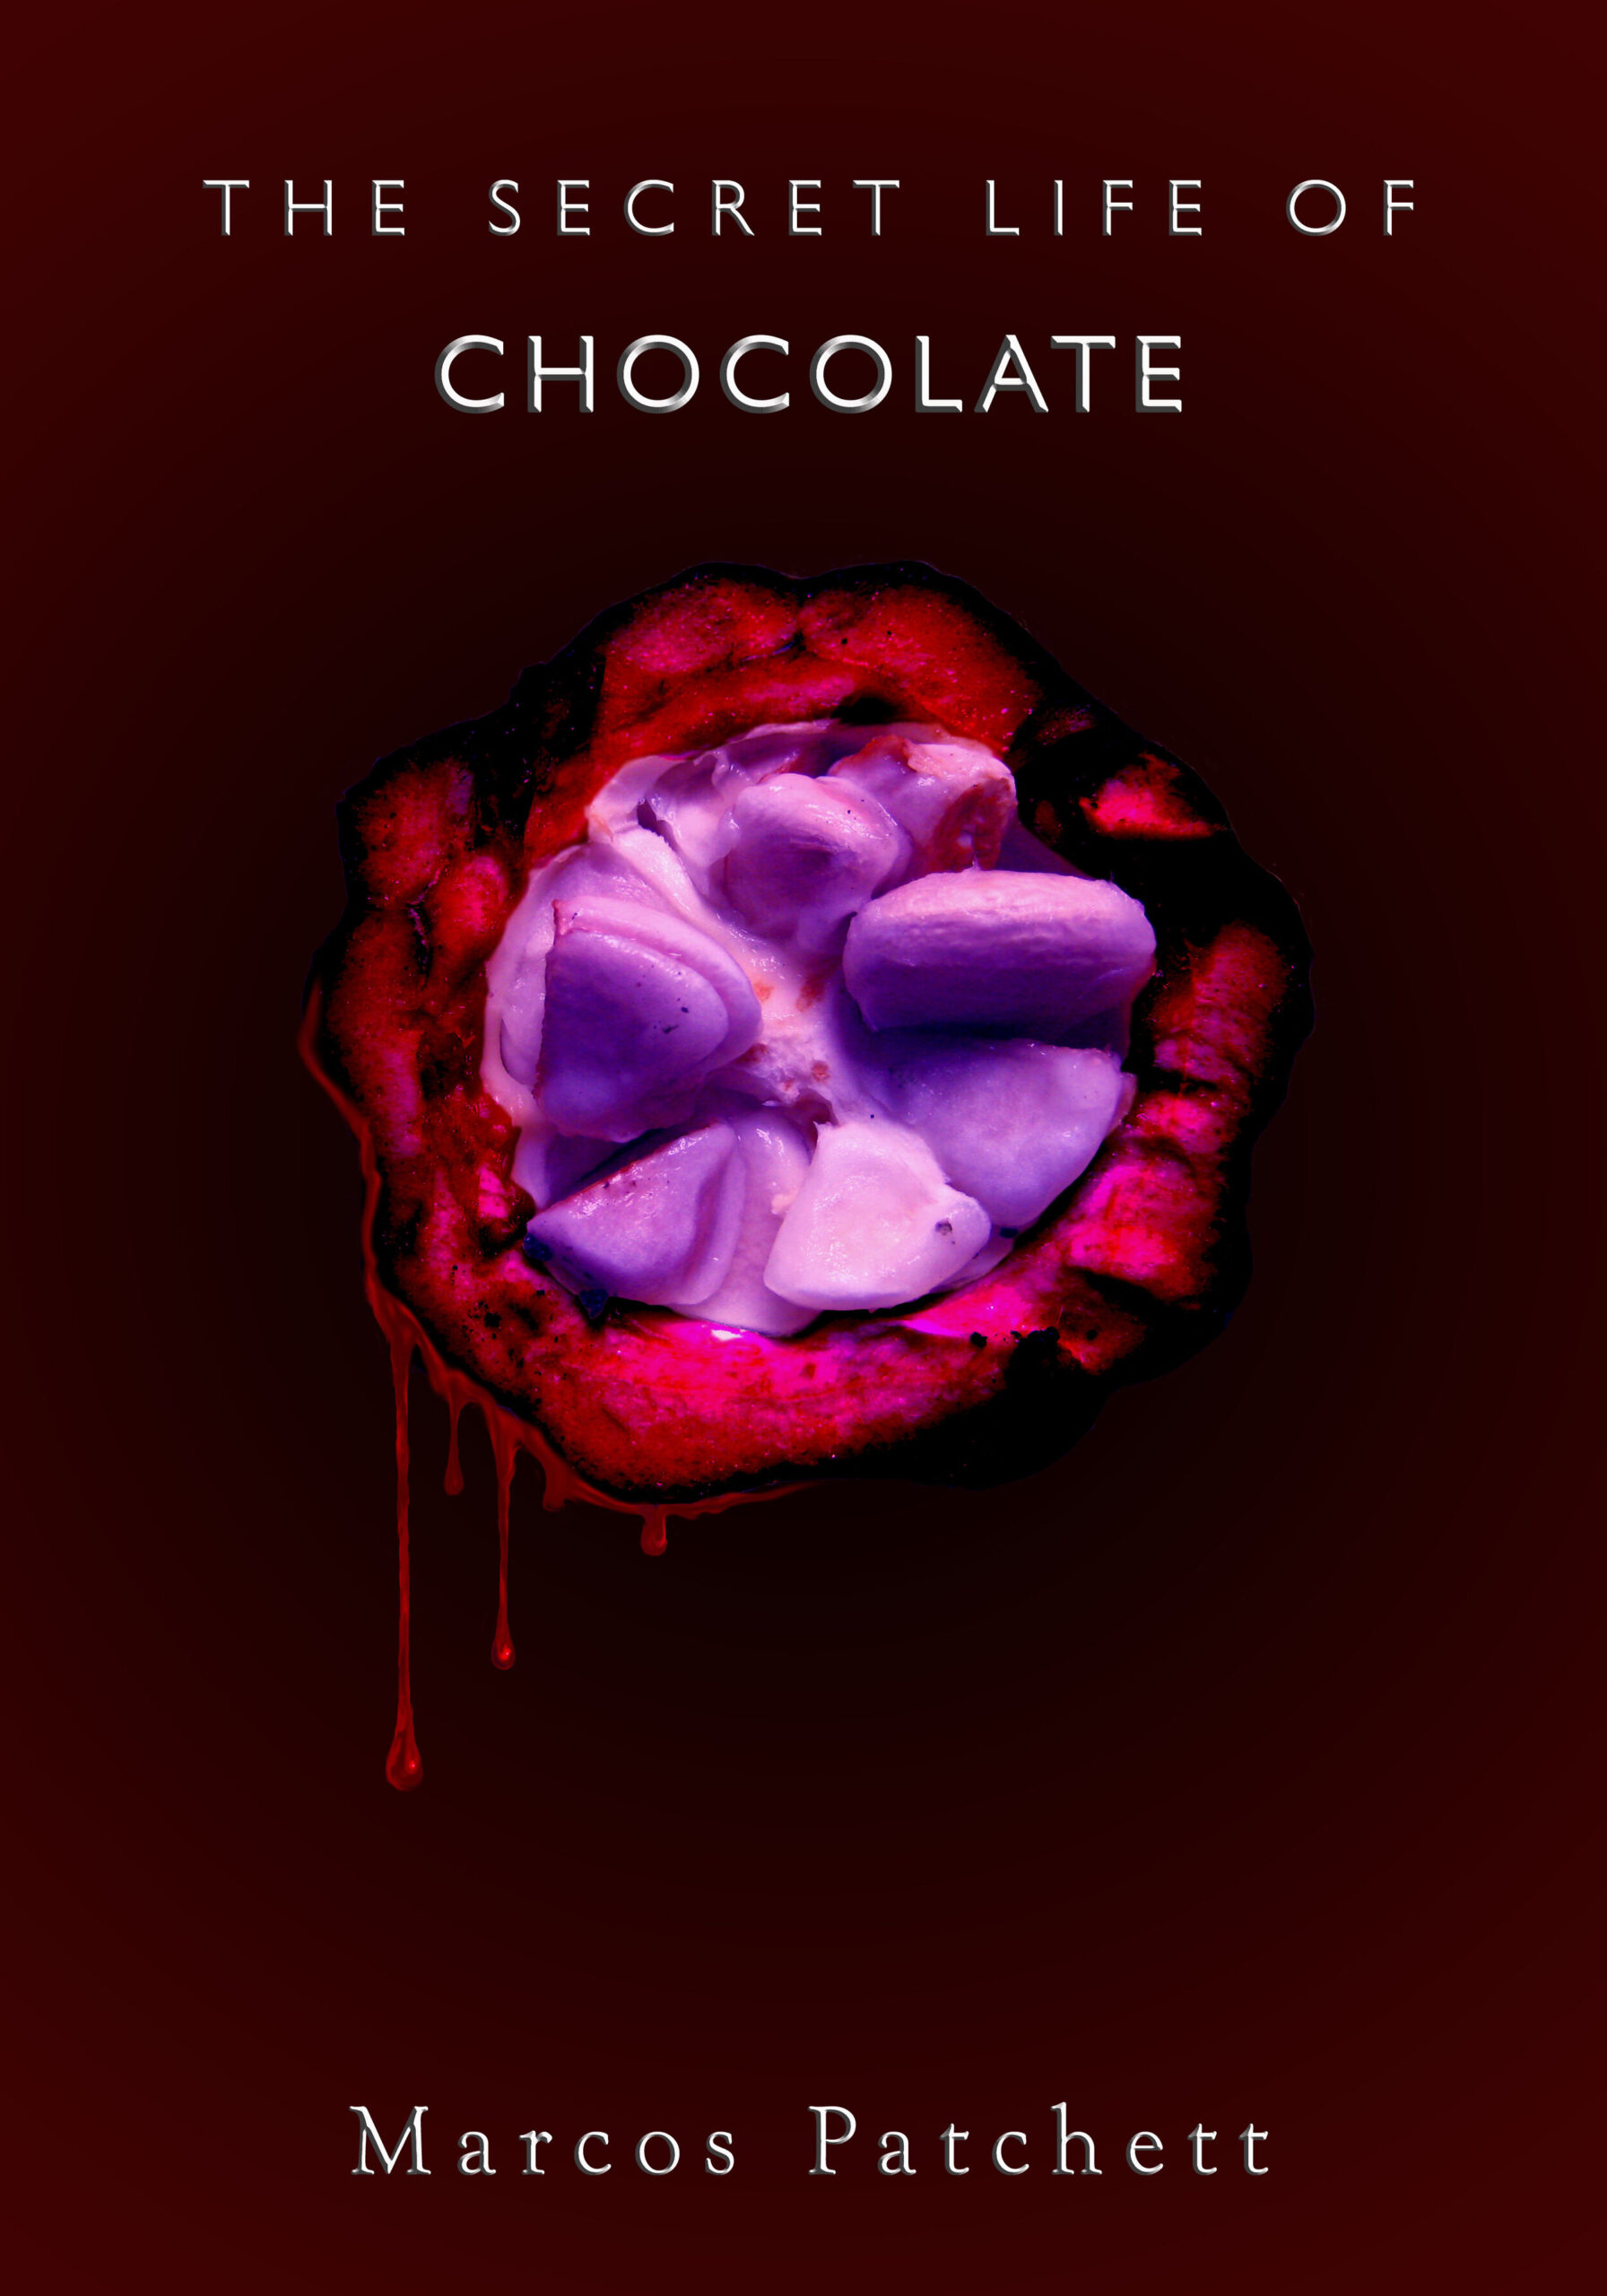 The Secret Life of Chocolate book cover.